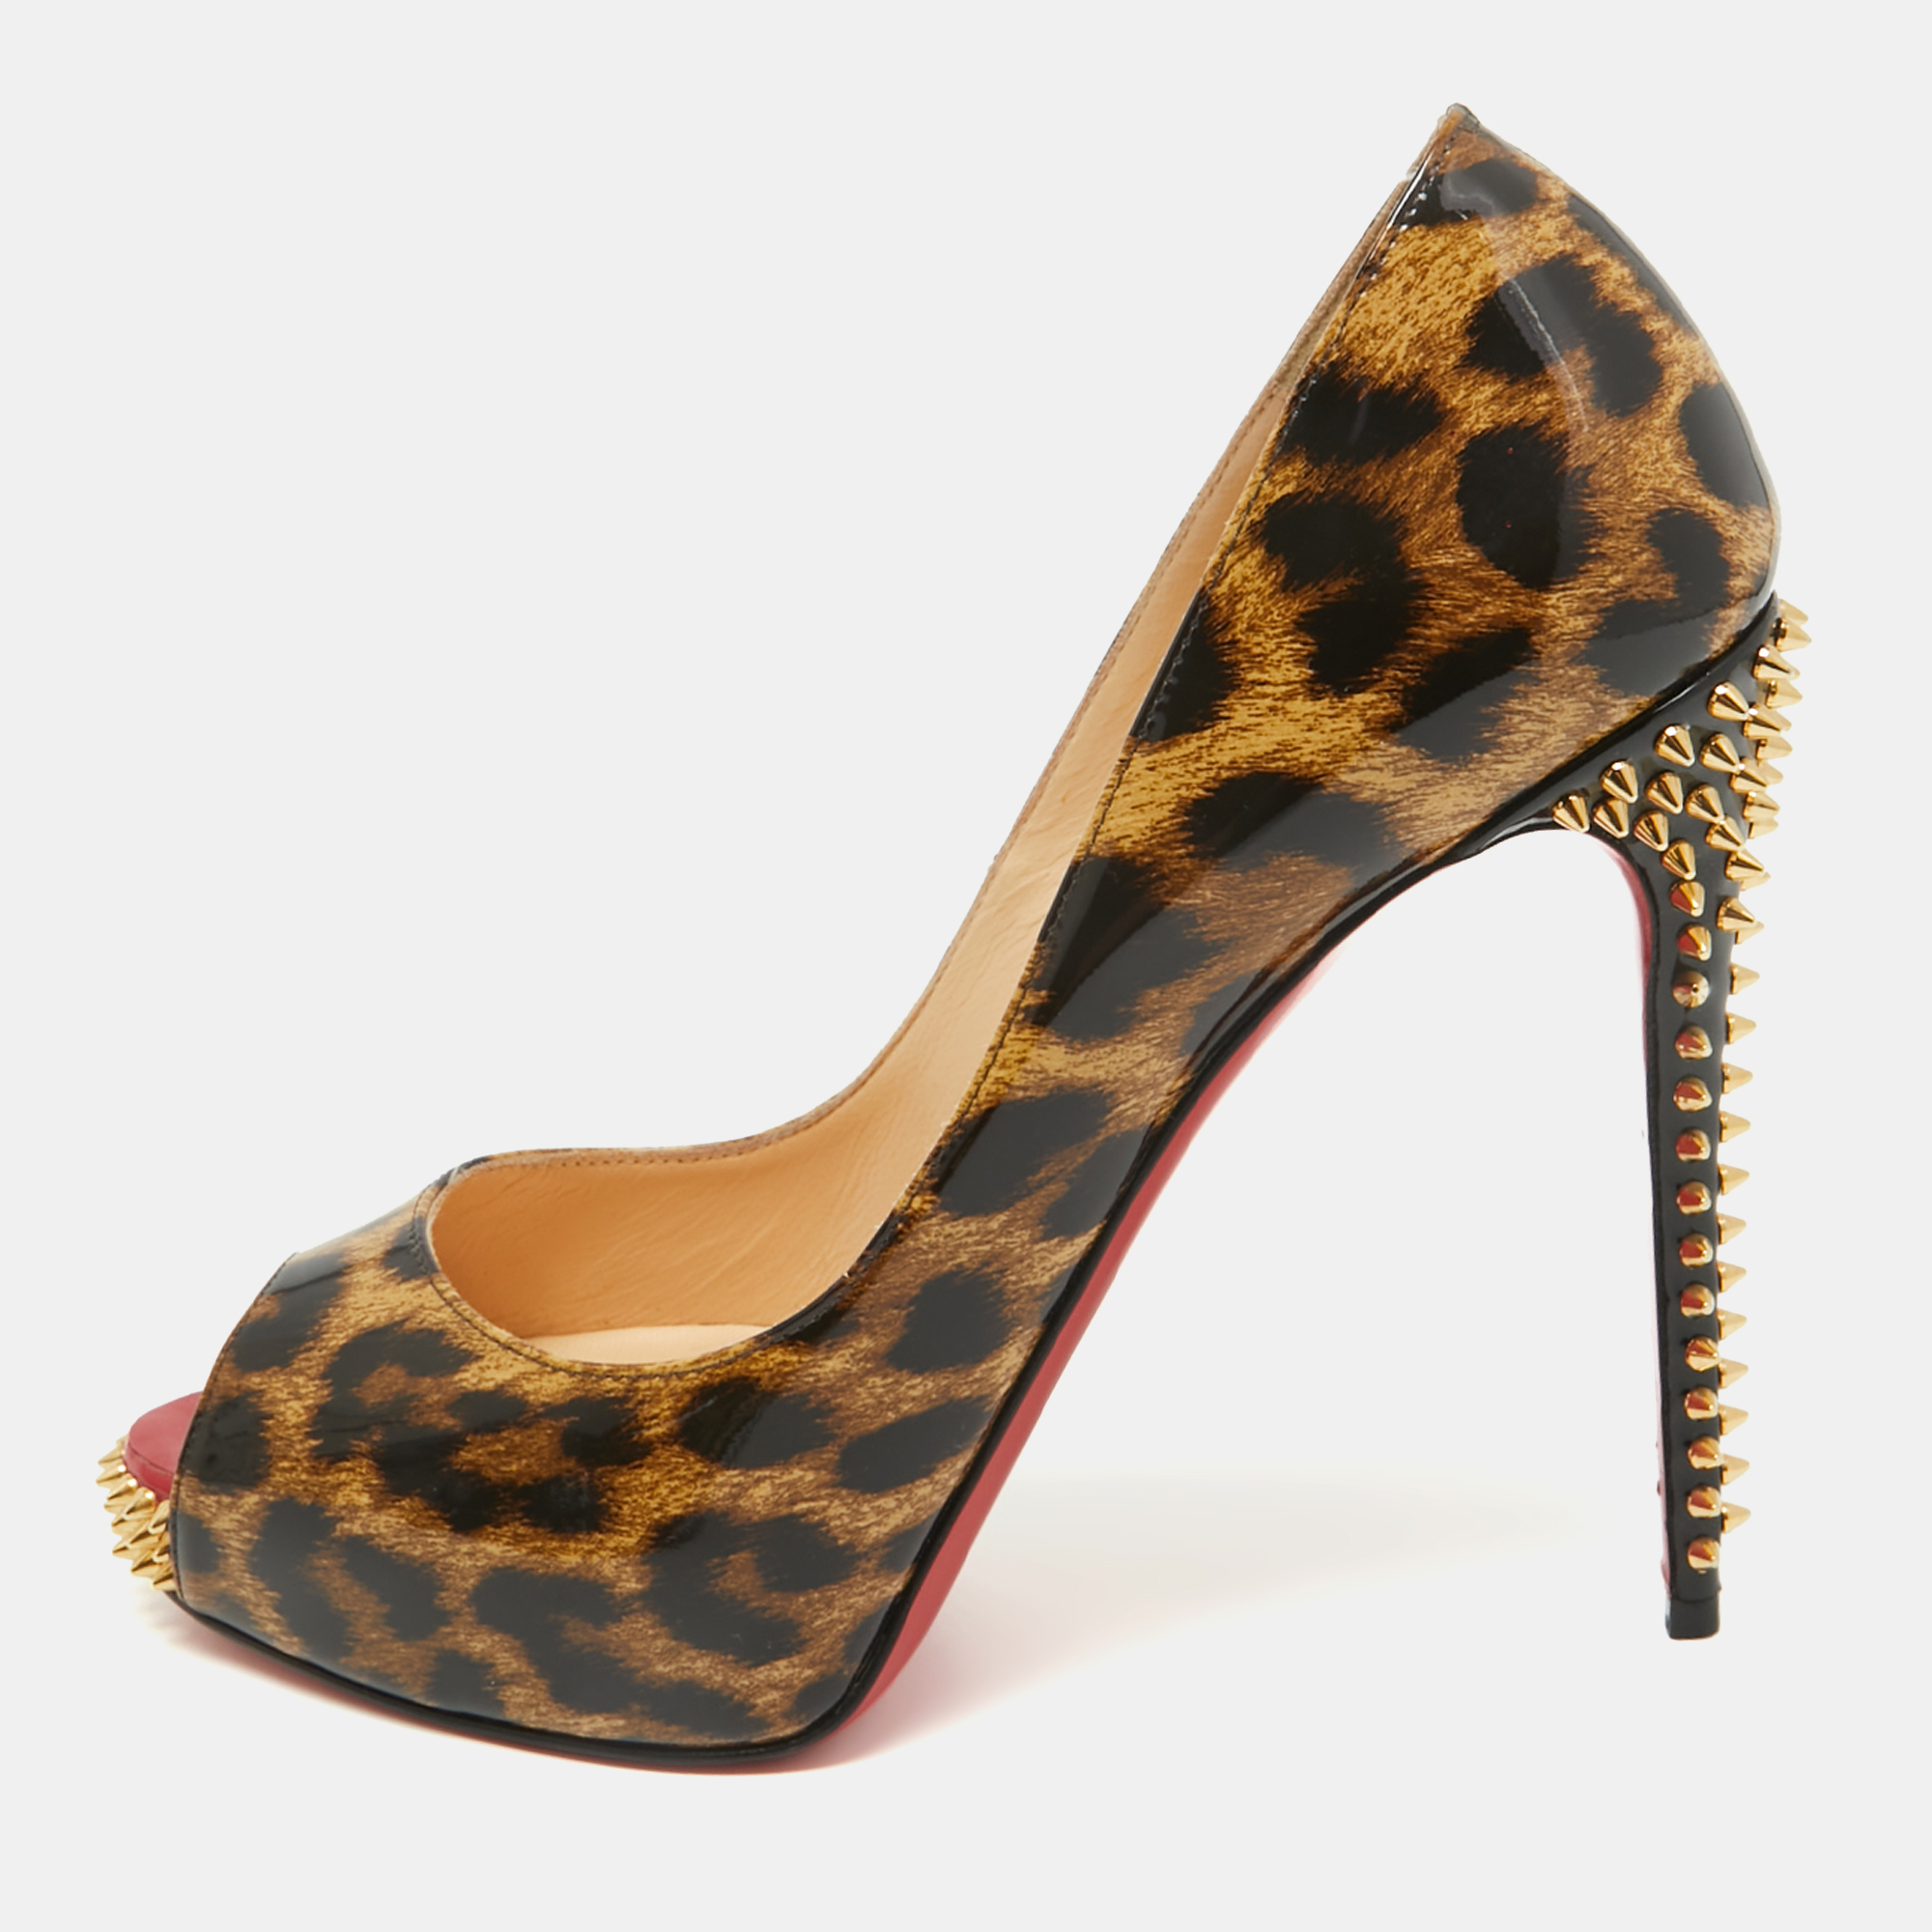 Christian louboutin black/brown leopard print patent leather new very prive spikes pumps size 38